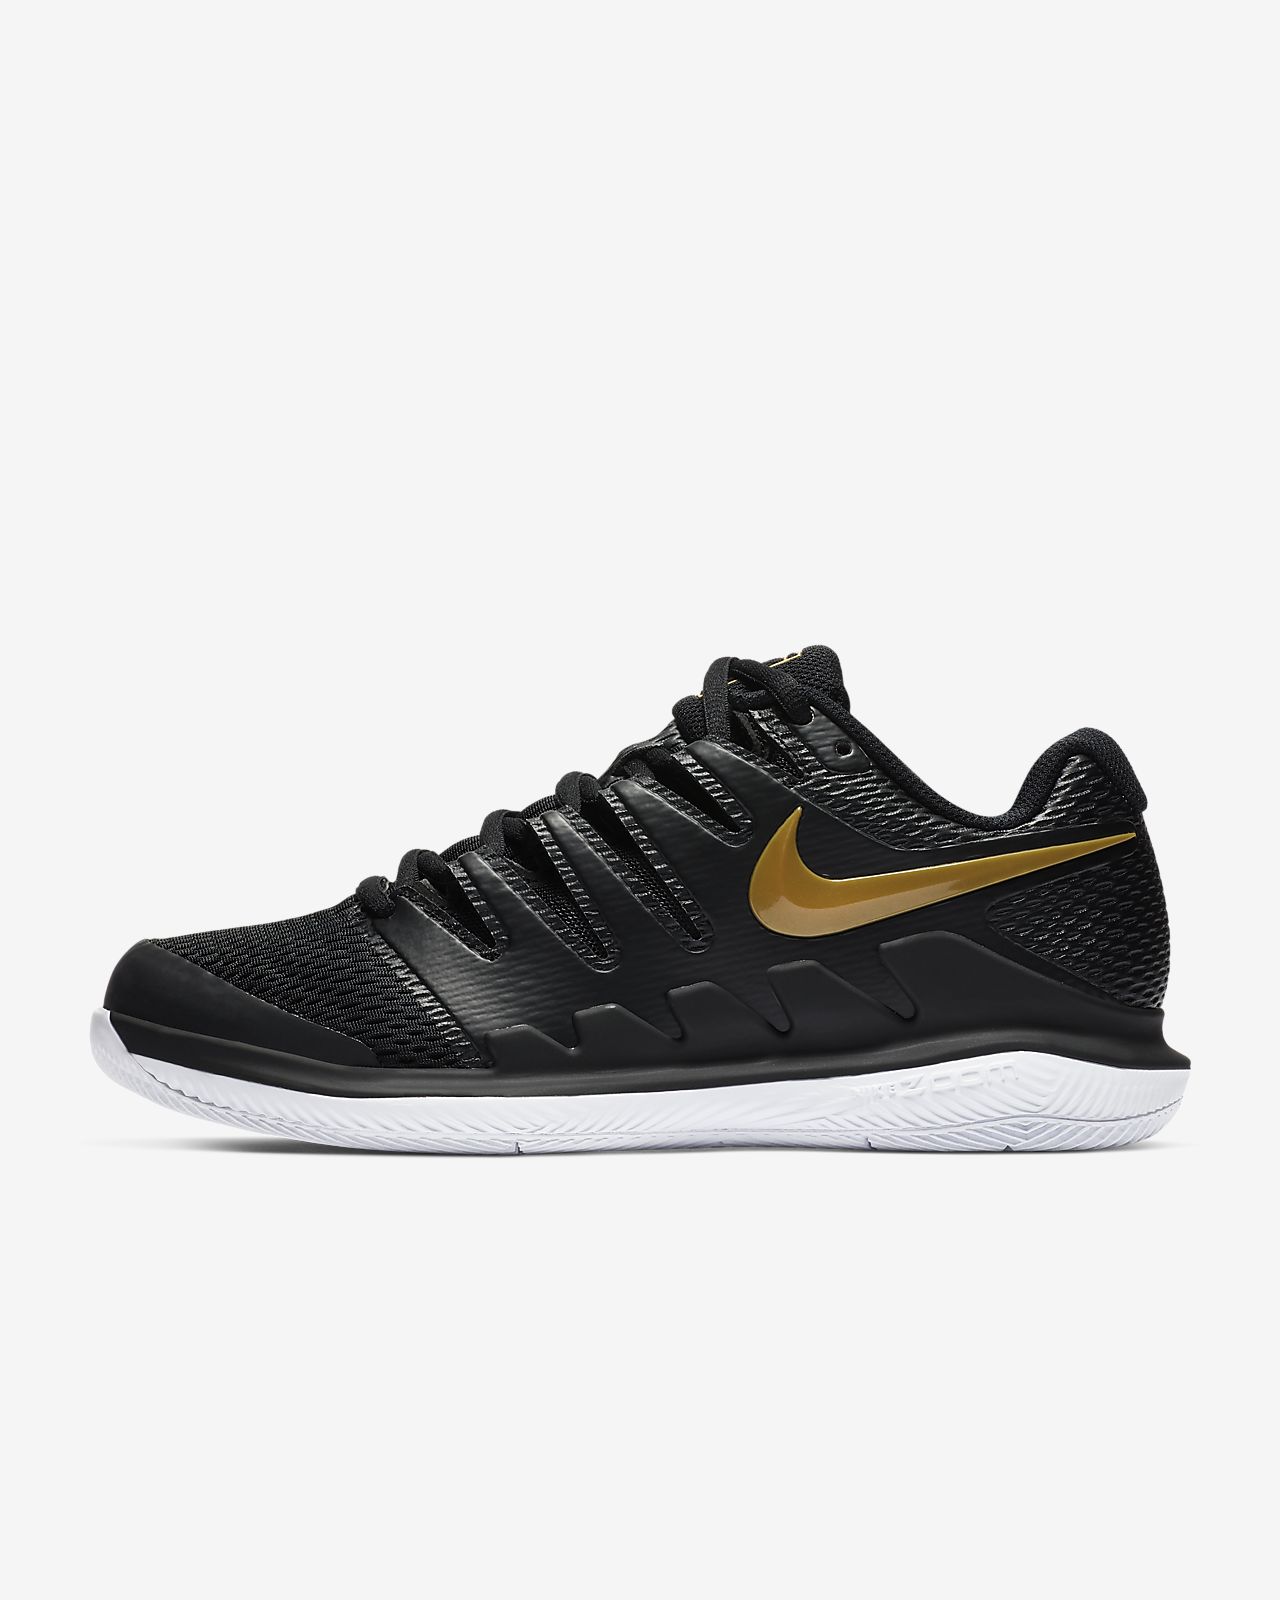 black and gold womens tennis shoes